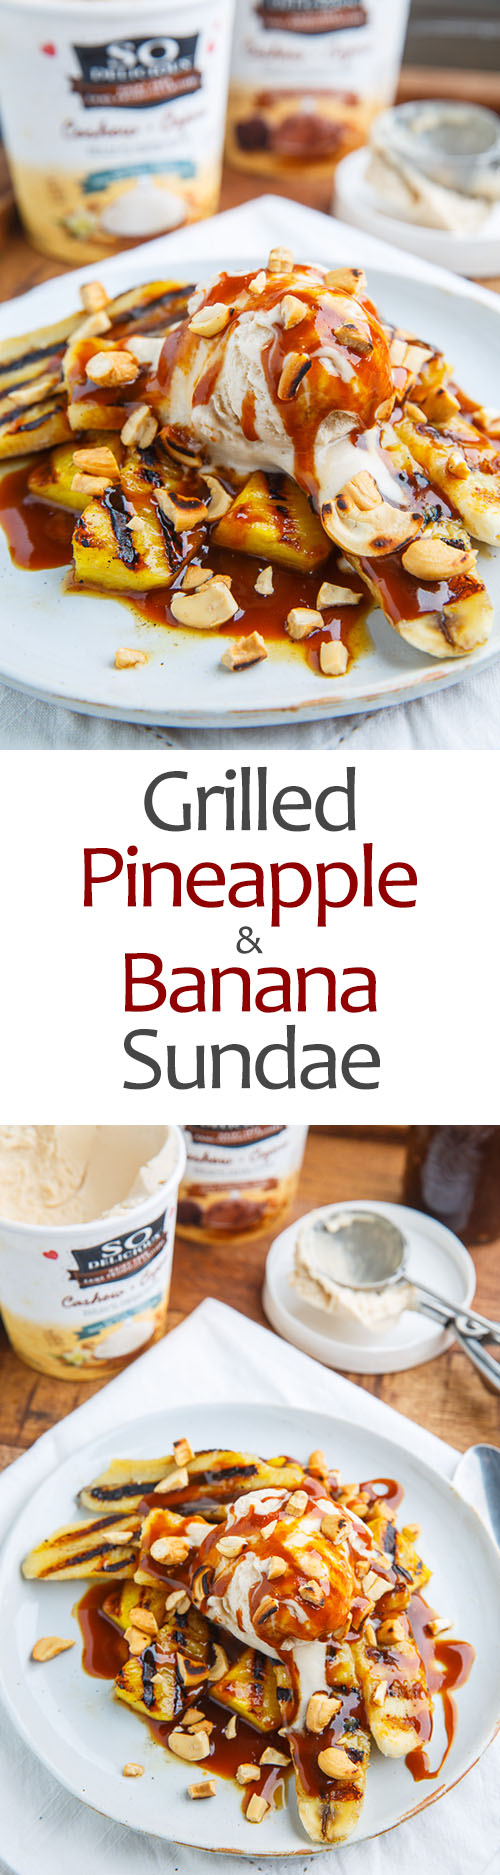 Grilled Pineapple and Banana Sundaes with Caramel Sauce and Cashews